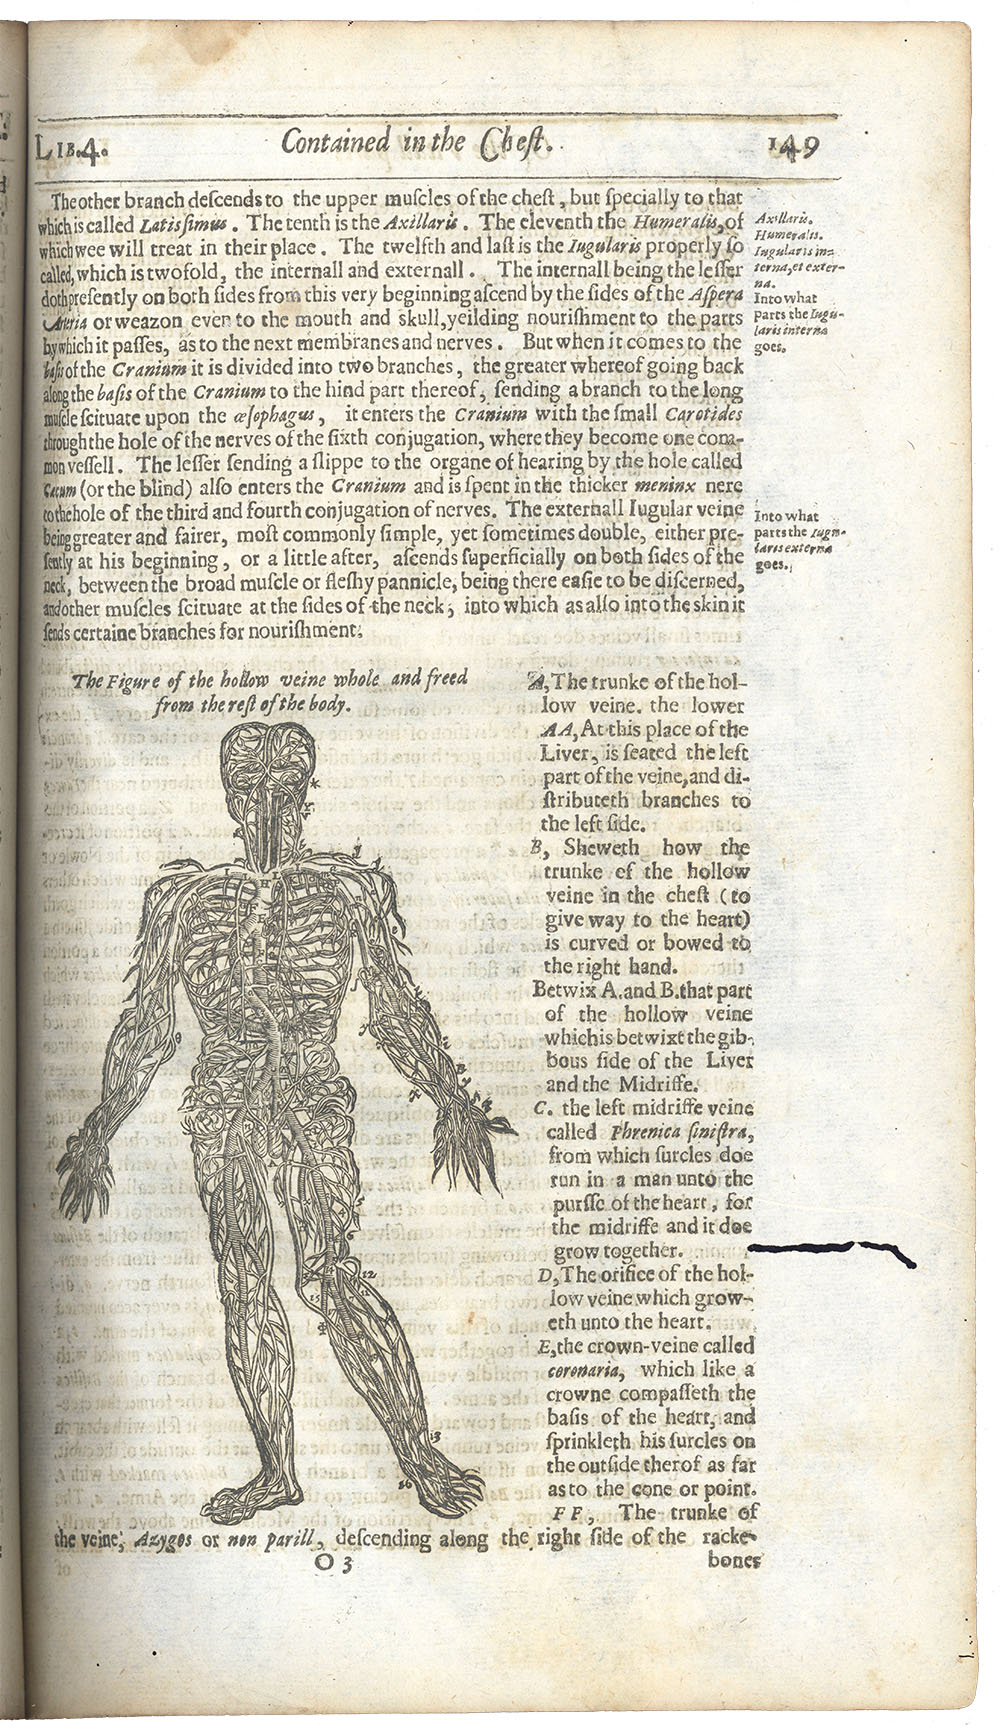 <p>Page 149. Image of veins of body.</p>
